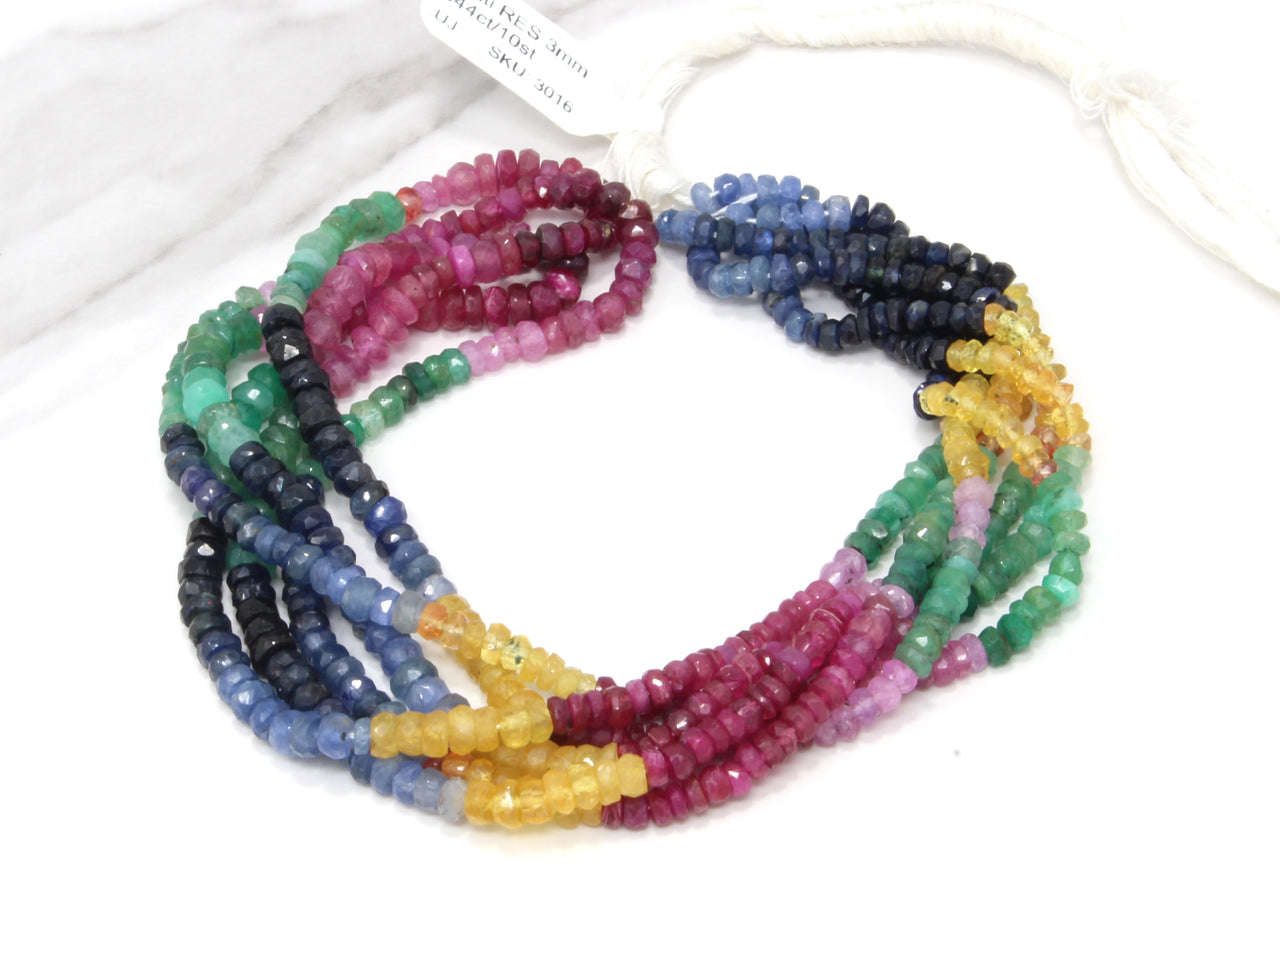 Rainbow Multi Ruby, Emerald, and Sapphire 3mm - 4mm Hand Faceted Rondelles Bead Strand